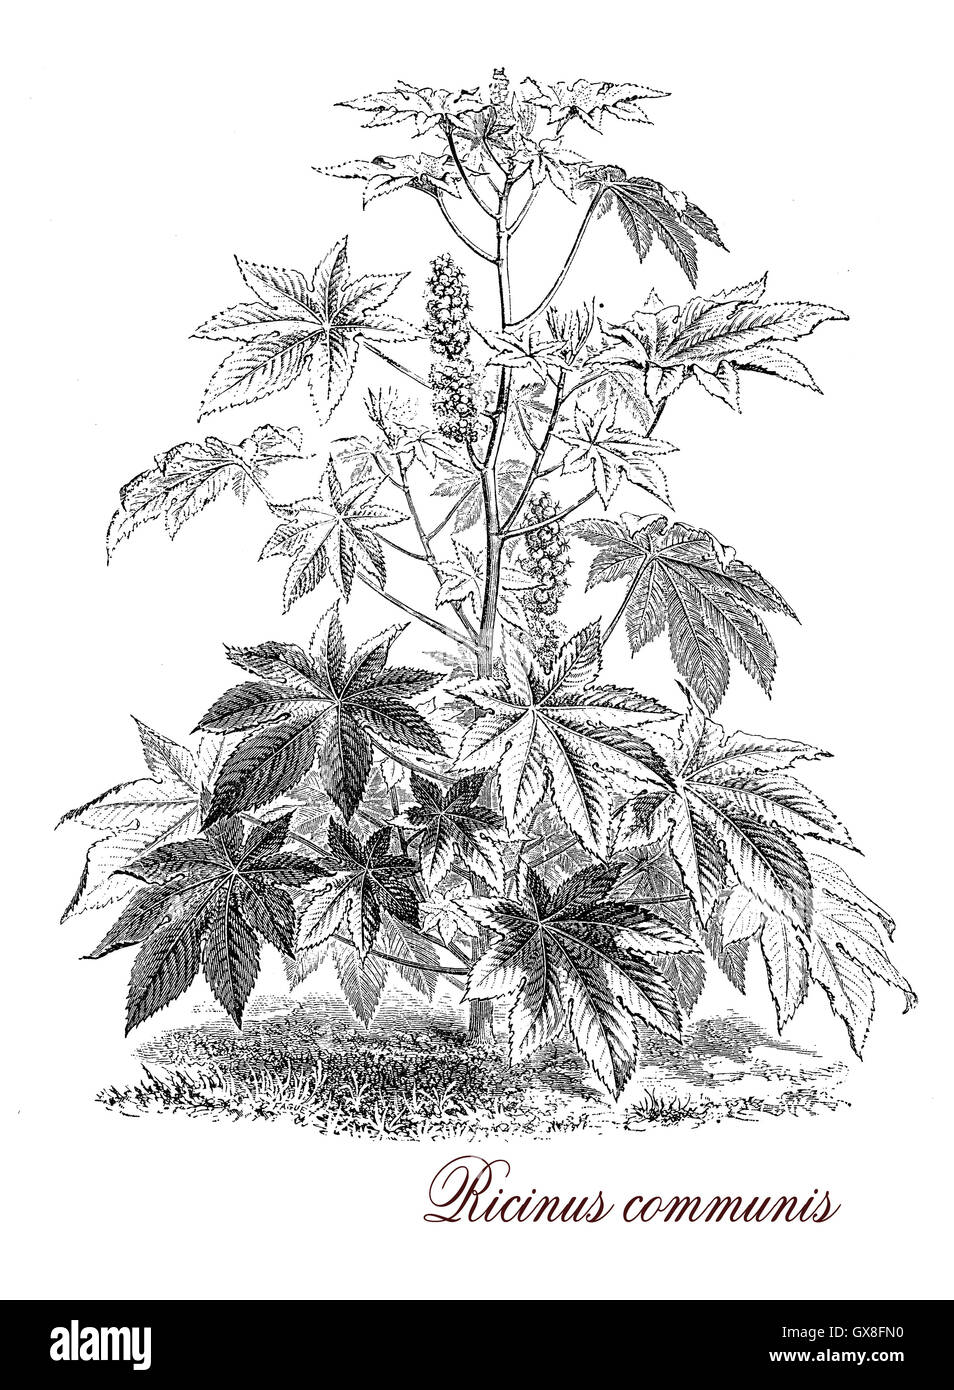 Vintage print describing Ricinus communis, flowering plant known also as castor-oil-plant, from the seeds is produced castor oil used as motor lubricant and in medicine and ricin, a water-soluble toxin. Stock Photo